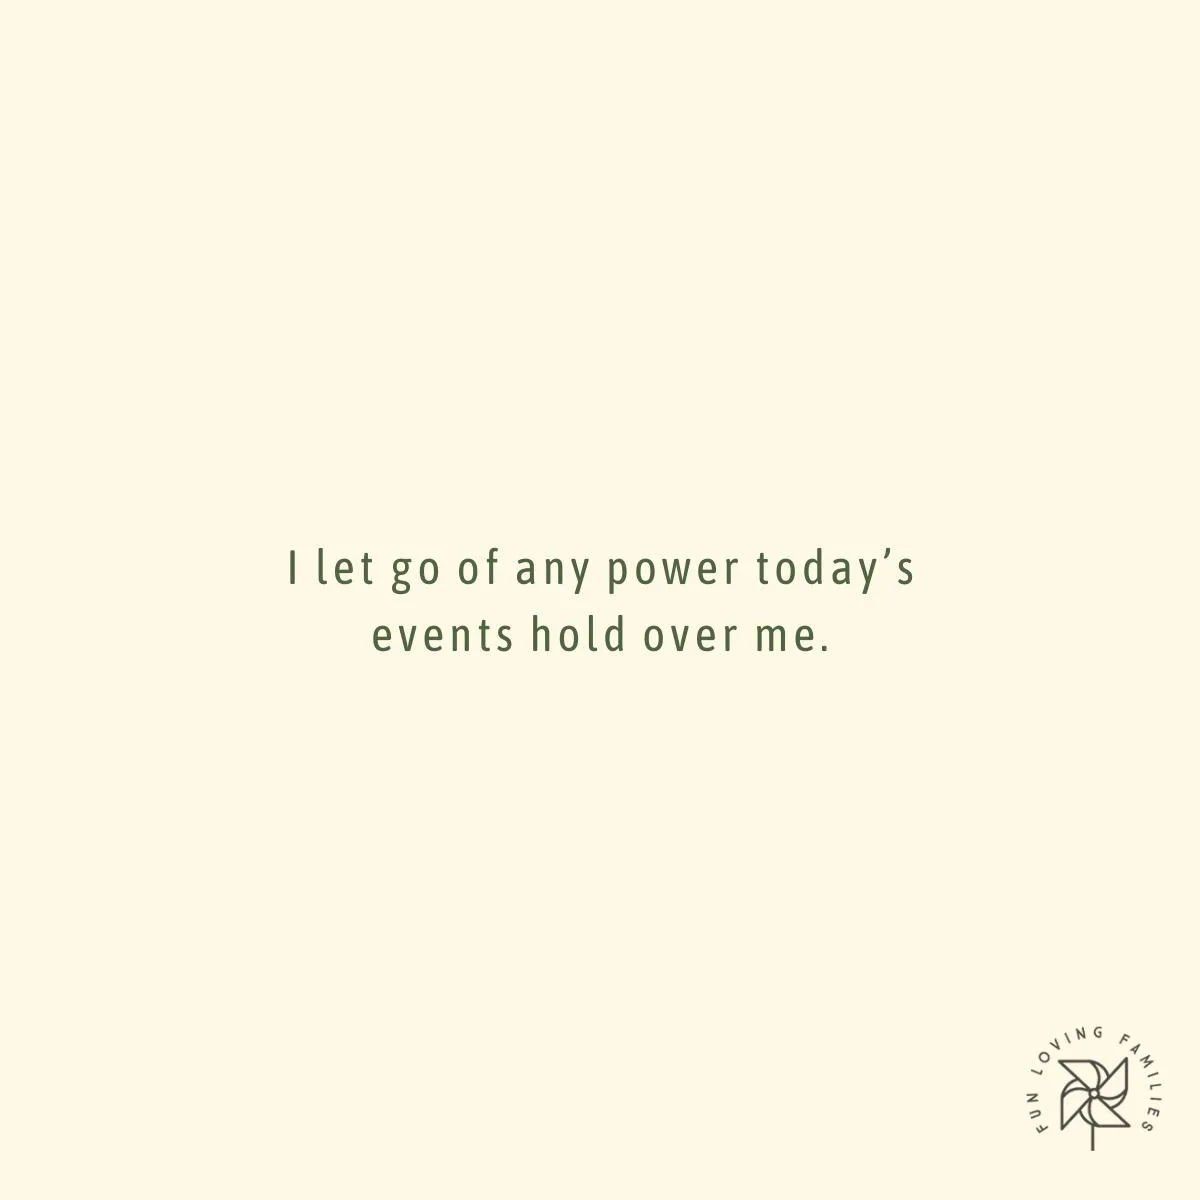 I let go of any power today’s events hold over me affirmation